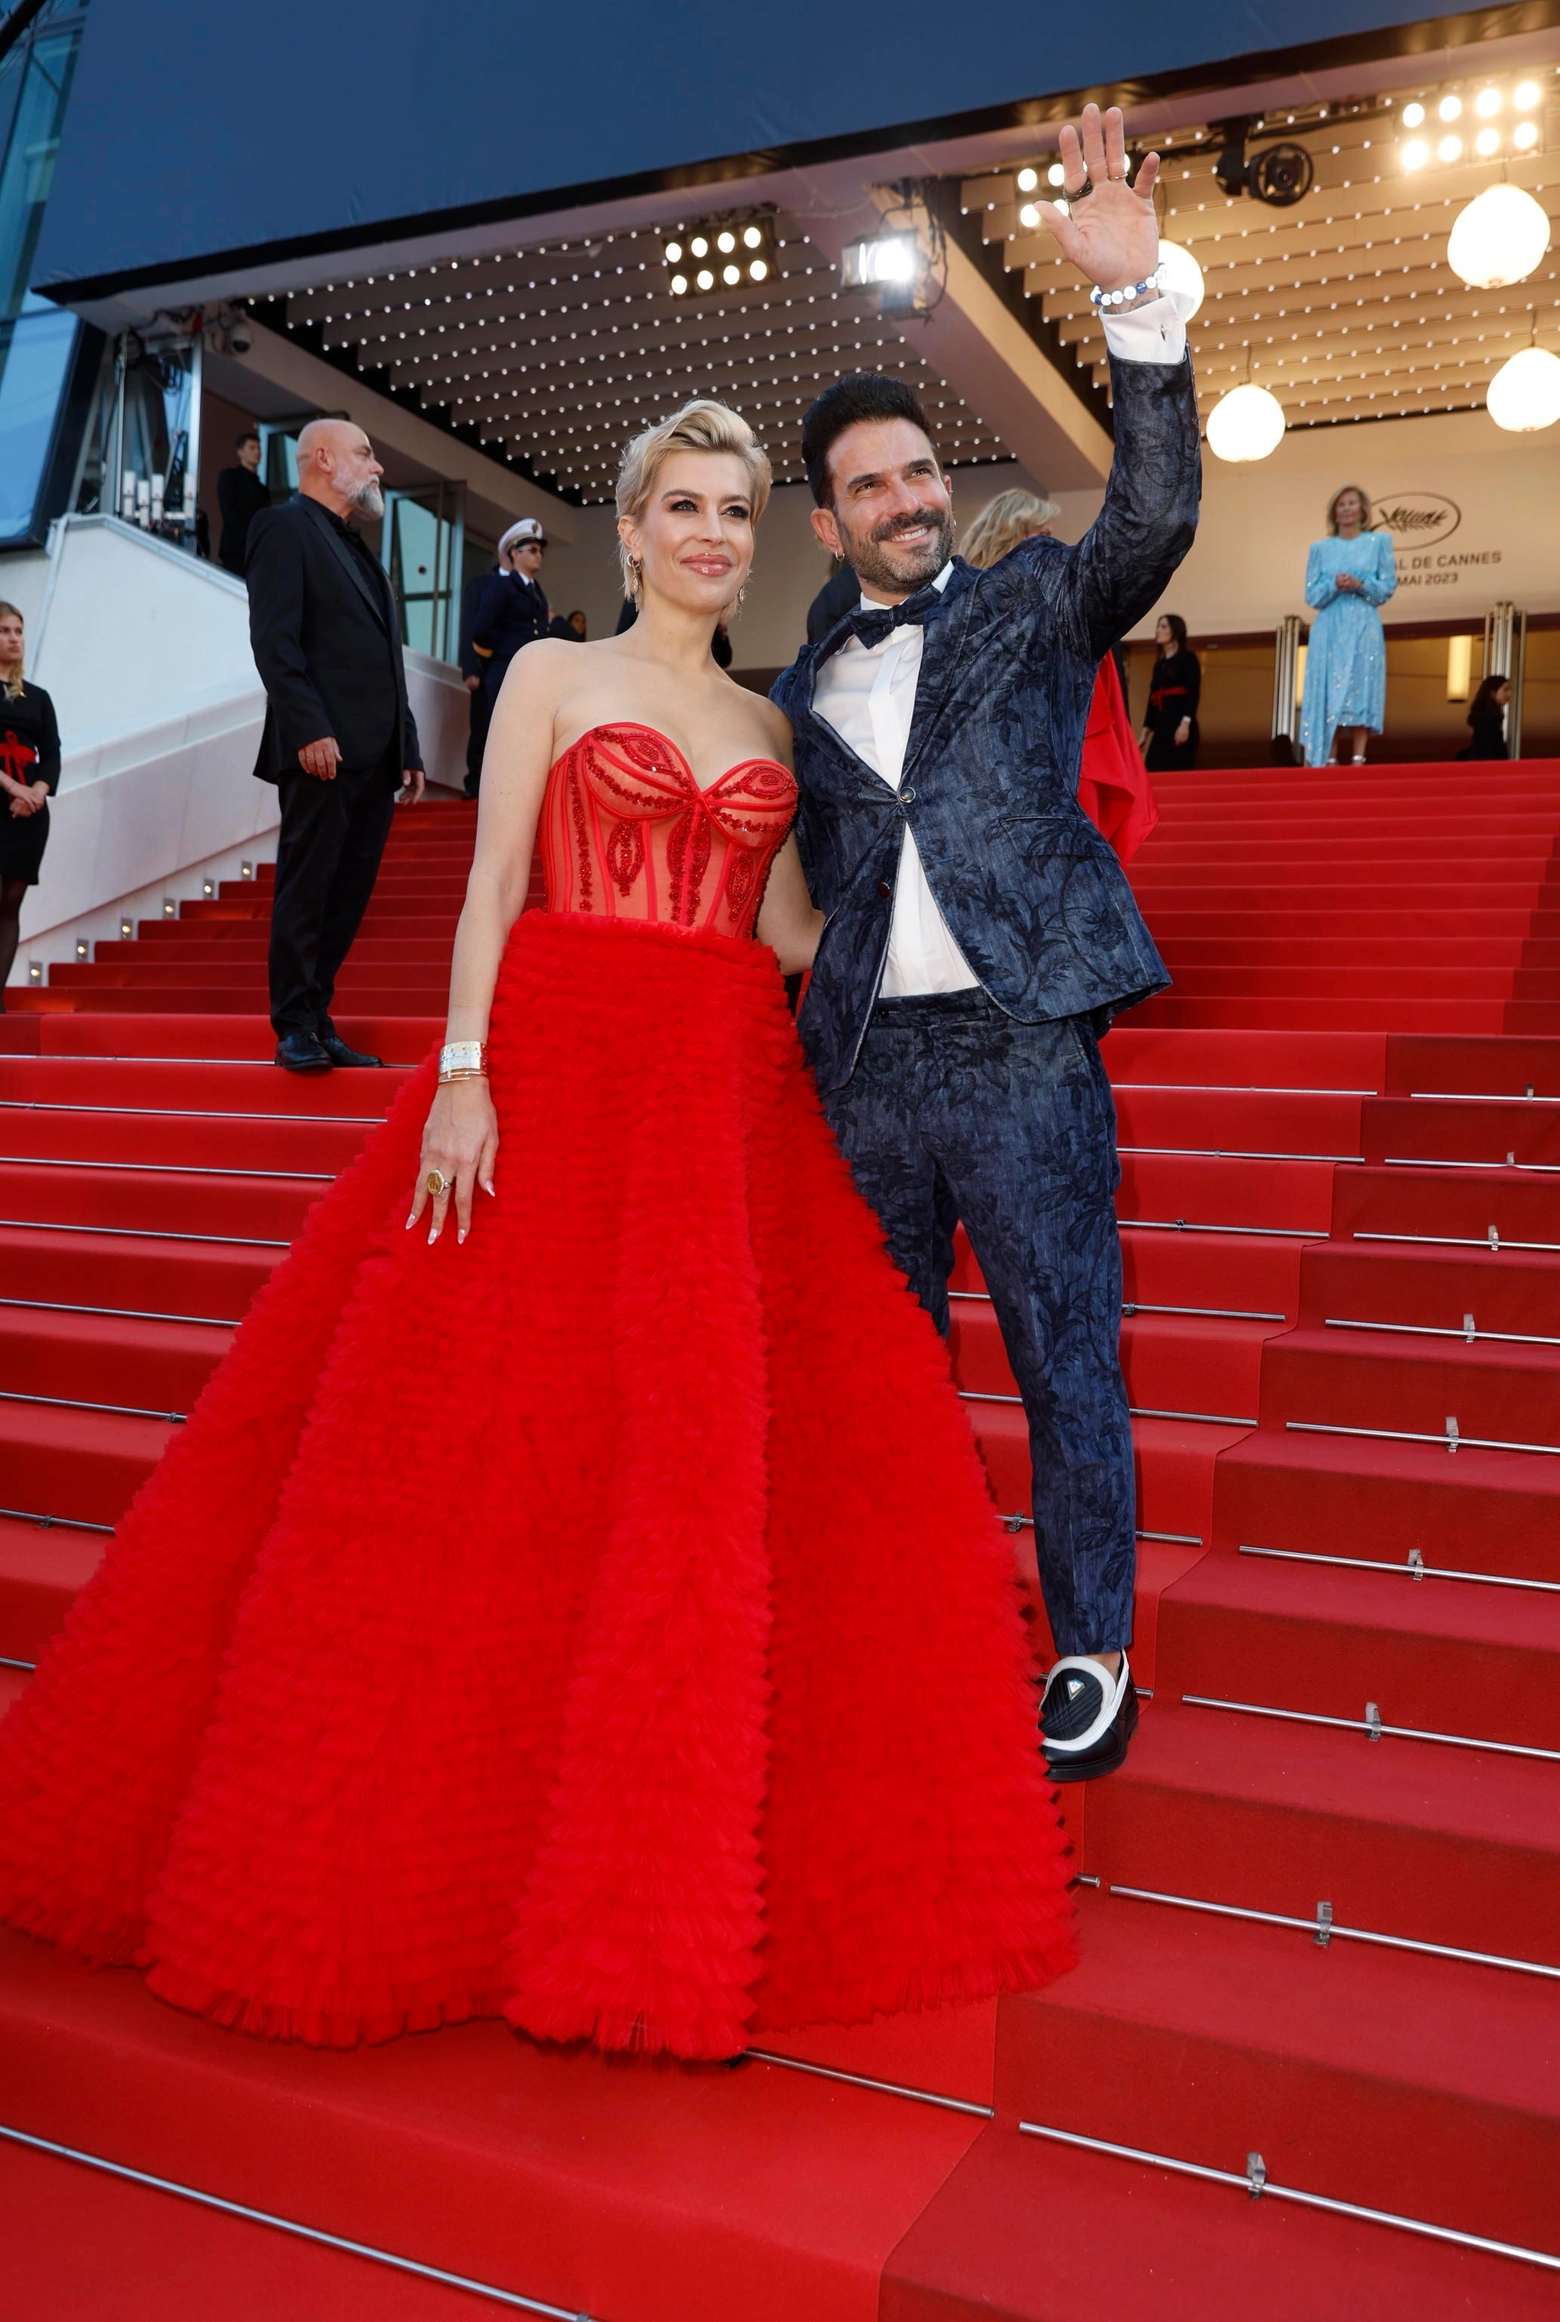 epa10644543 Marc Terenzi (R) and Verena Kerth arrive for the screening of 'Le Jeu de la reine' (Firebrand) during the 76th annual Cannes Film Festival, in Cannes, France, 21 May 2023. The movie is presented in the Official Competition of the festival which runs from 16 to 27 May.  EPA/SEBASTIEN NOGIER